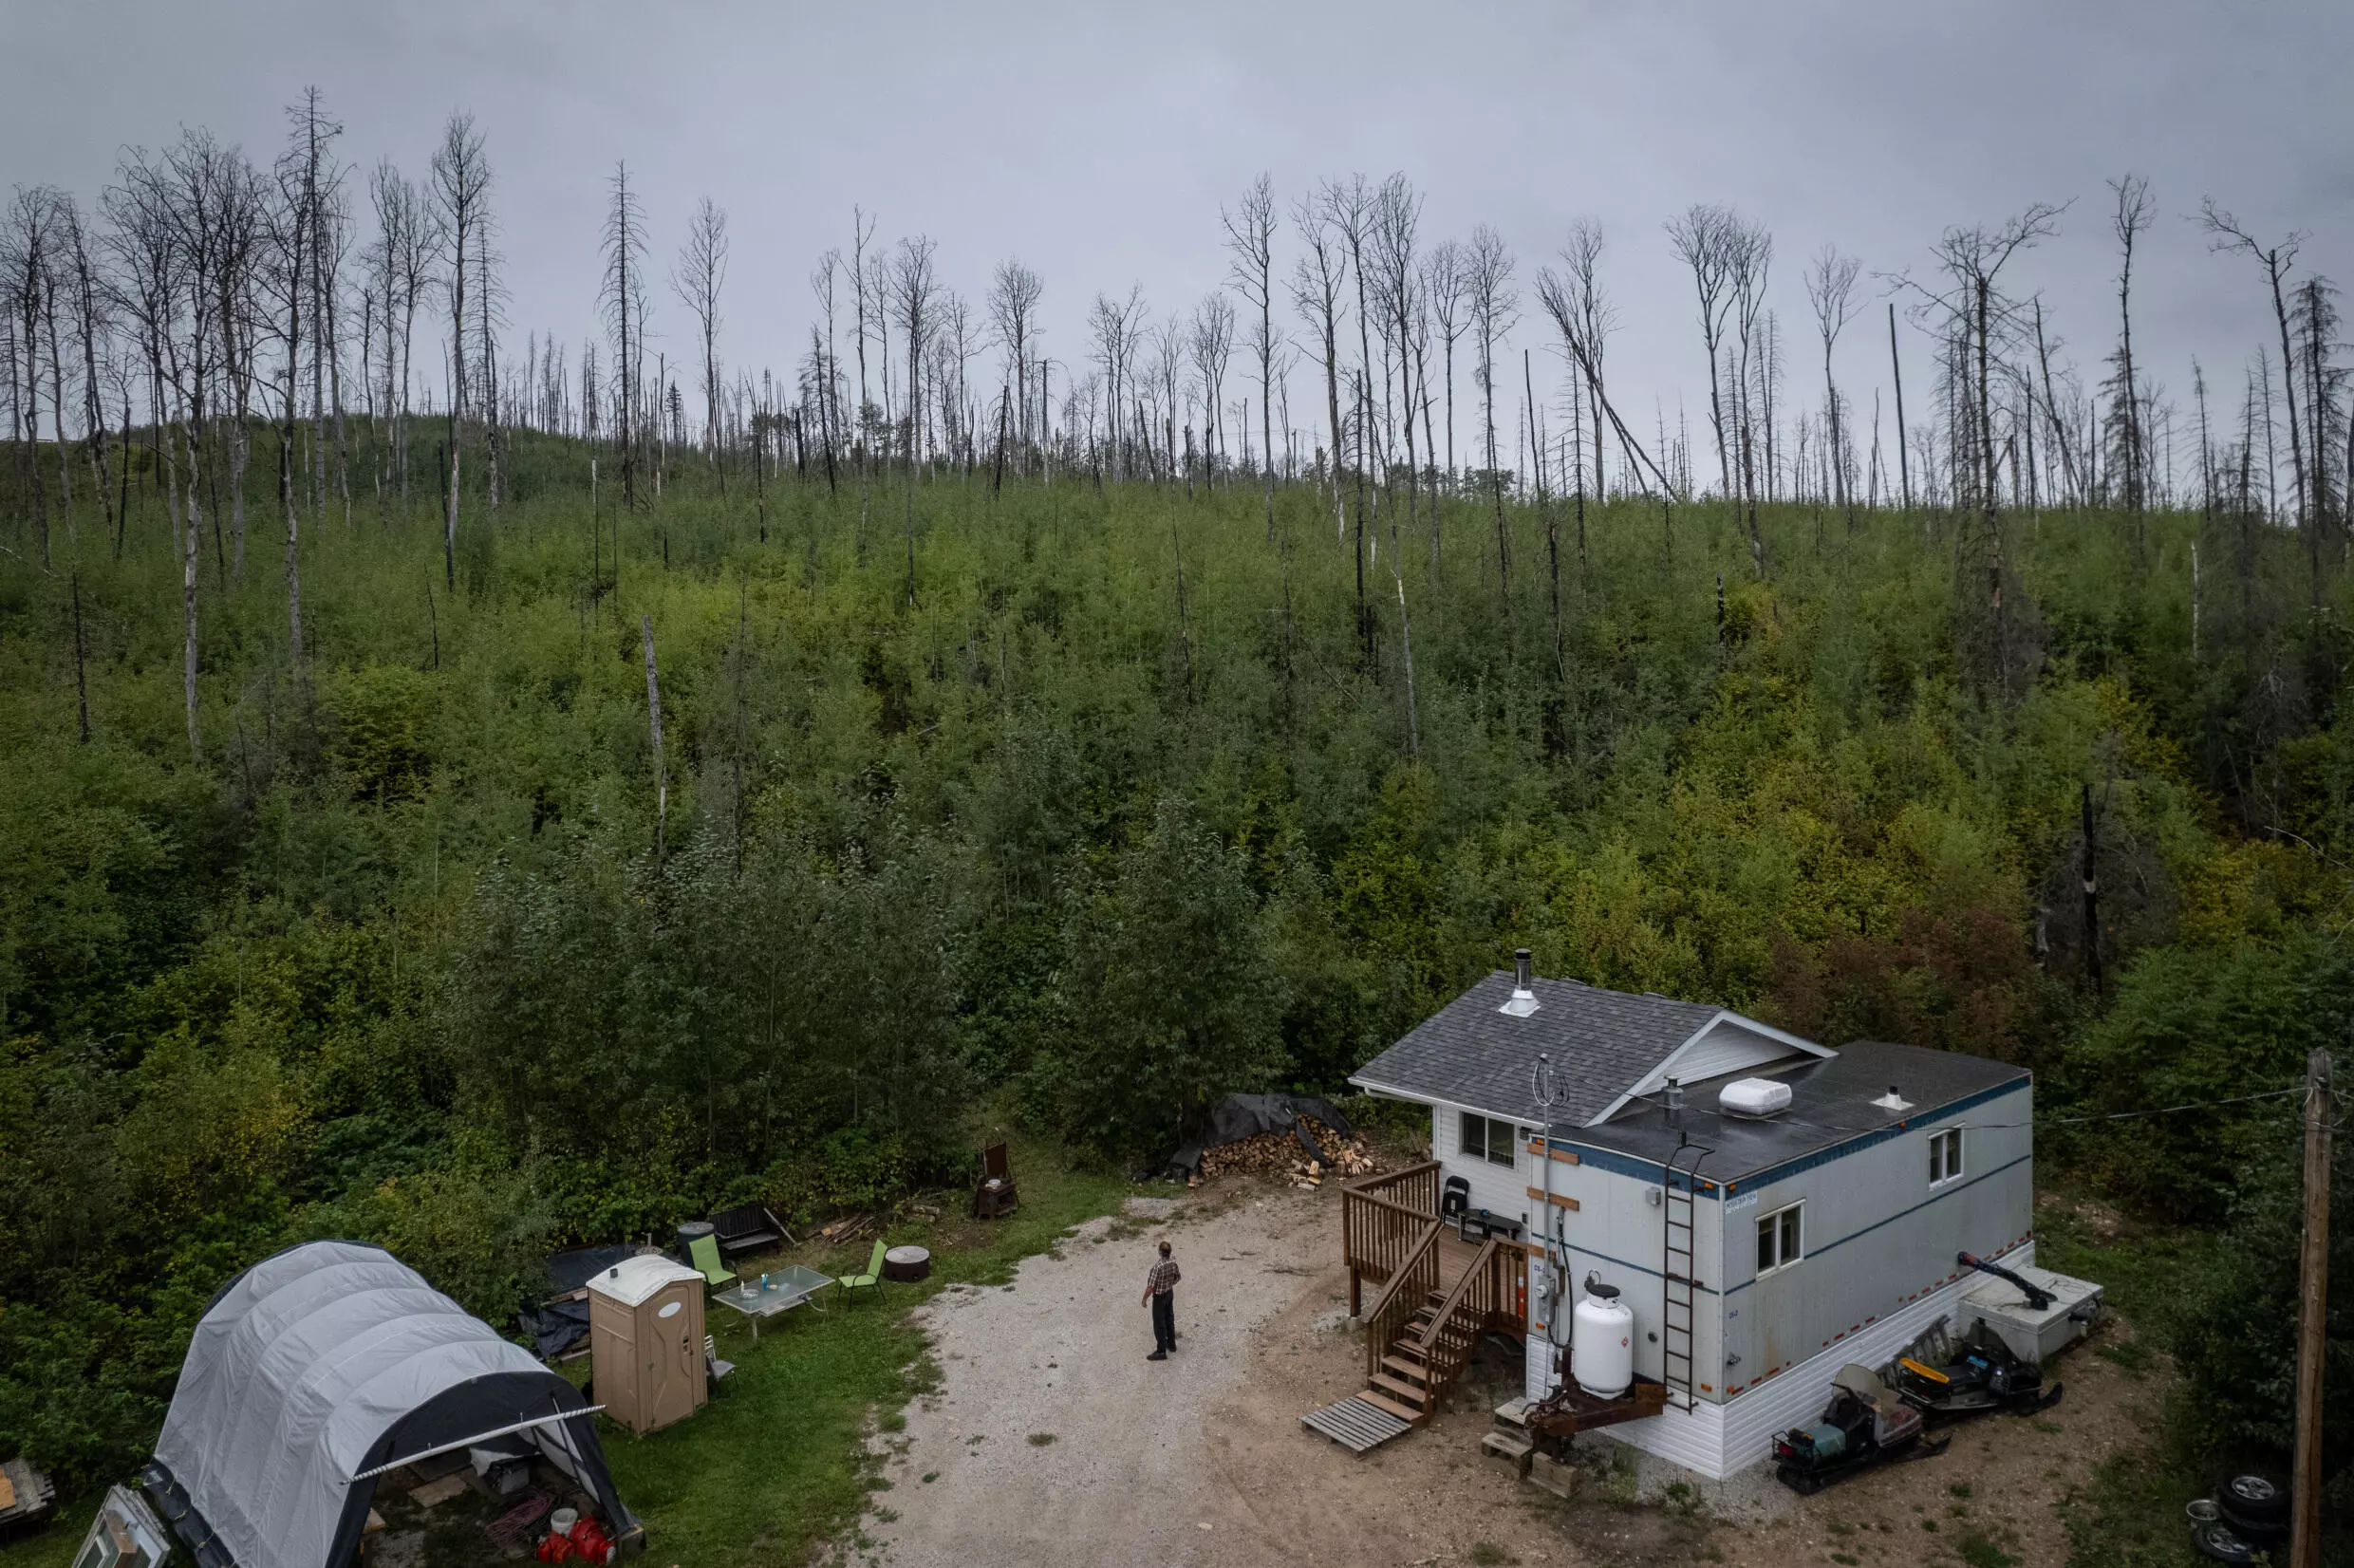 Harvey Sykes lost his home in the Fort McMurray wildfire in 2016; even today, dead trees dot the landscape where he rebuilt his house. Photo: AFP